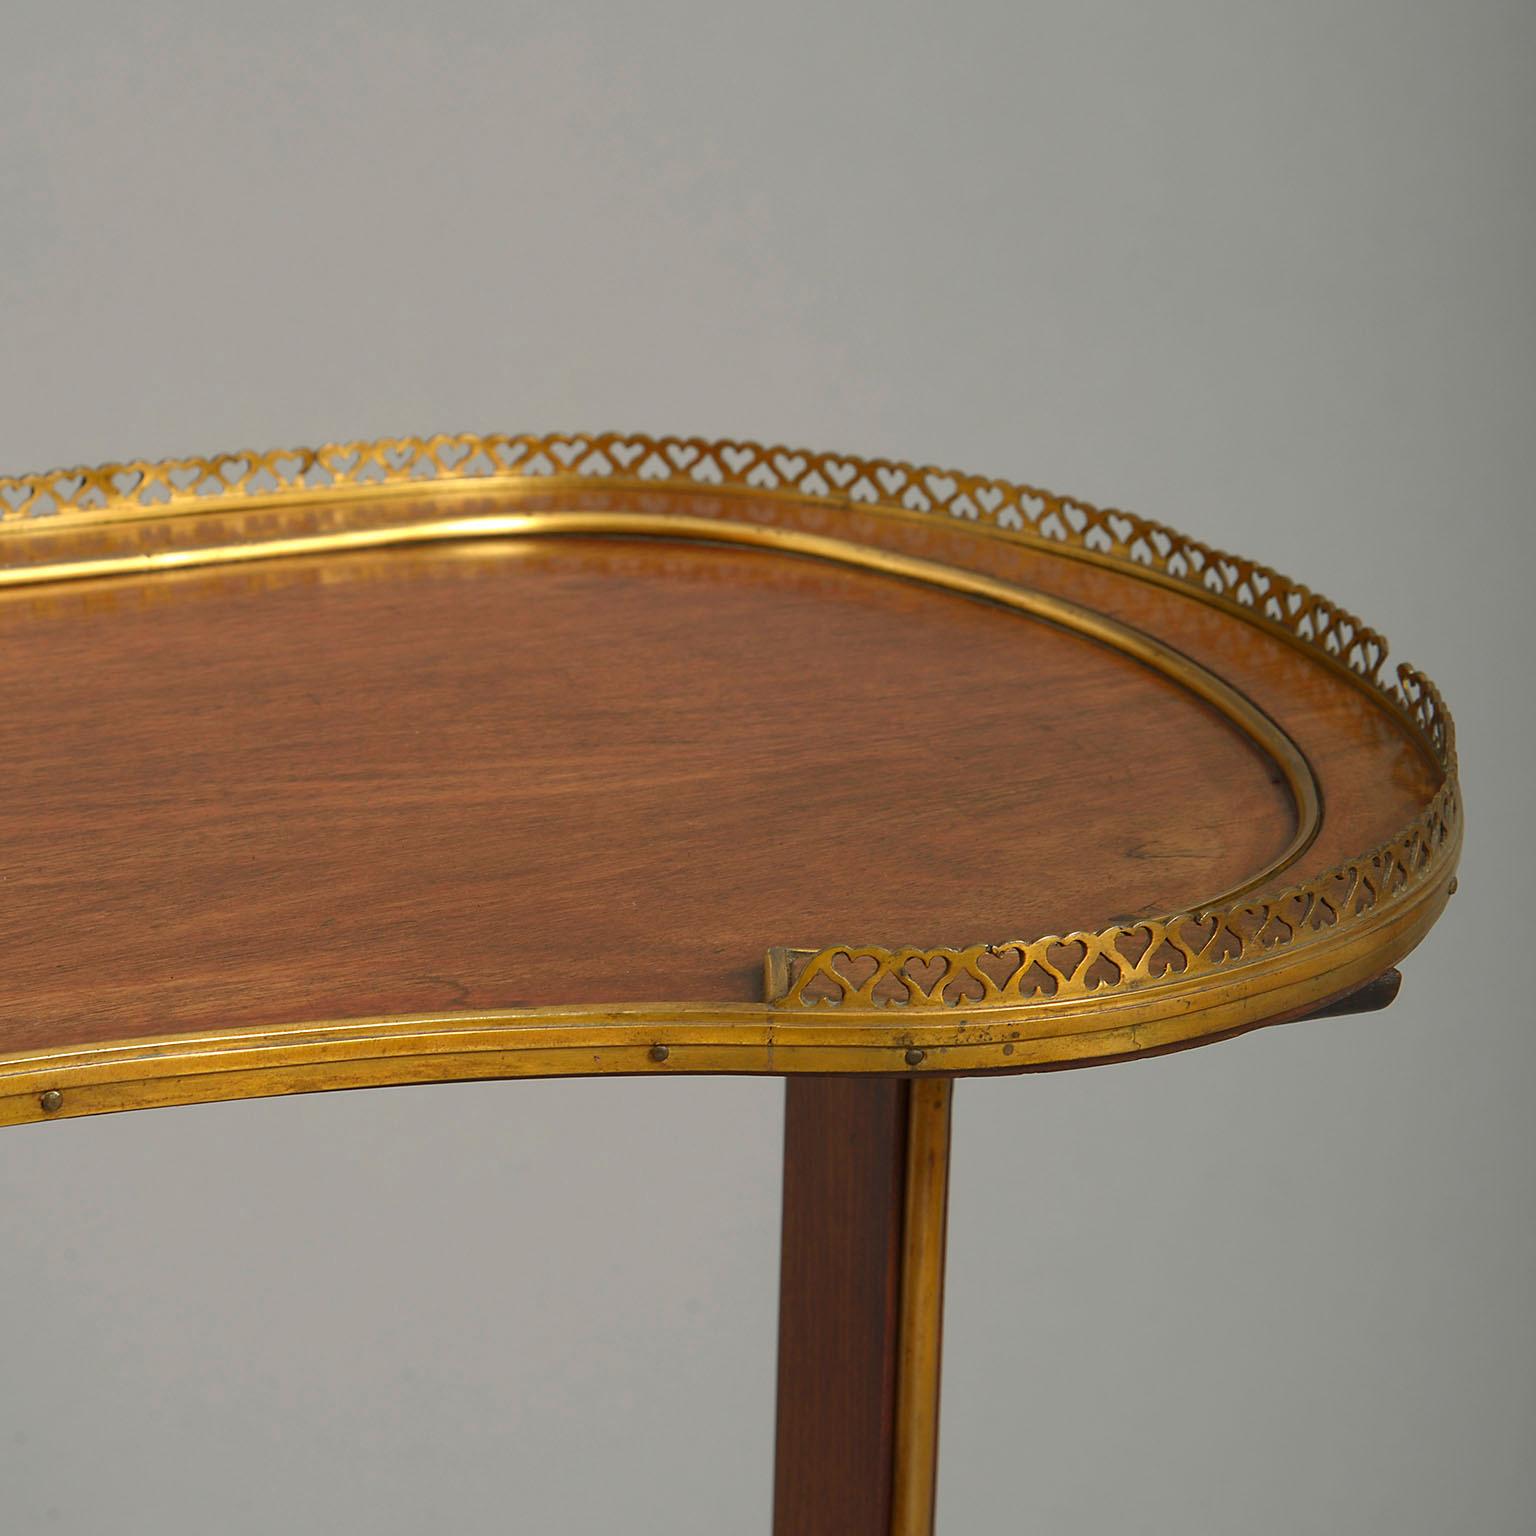 Fretwork Late 18th Century Russian Brass-Mounted Mahogany Table